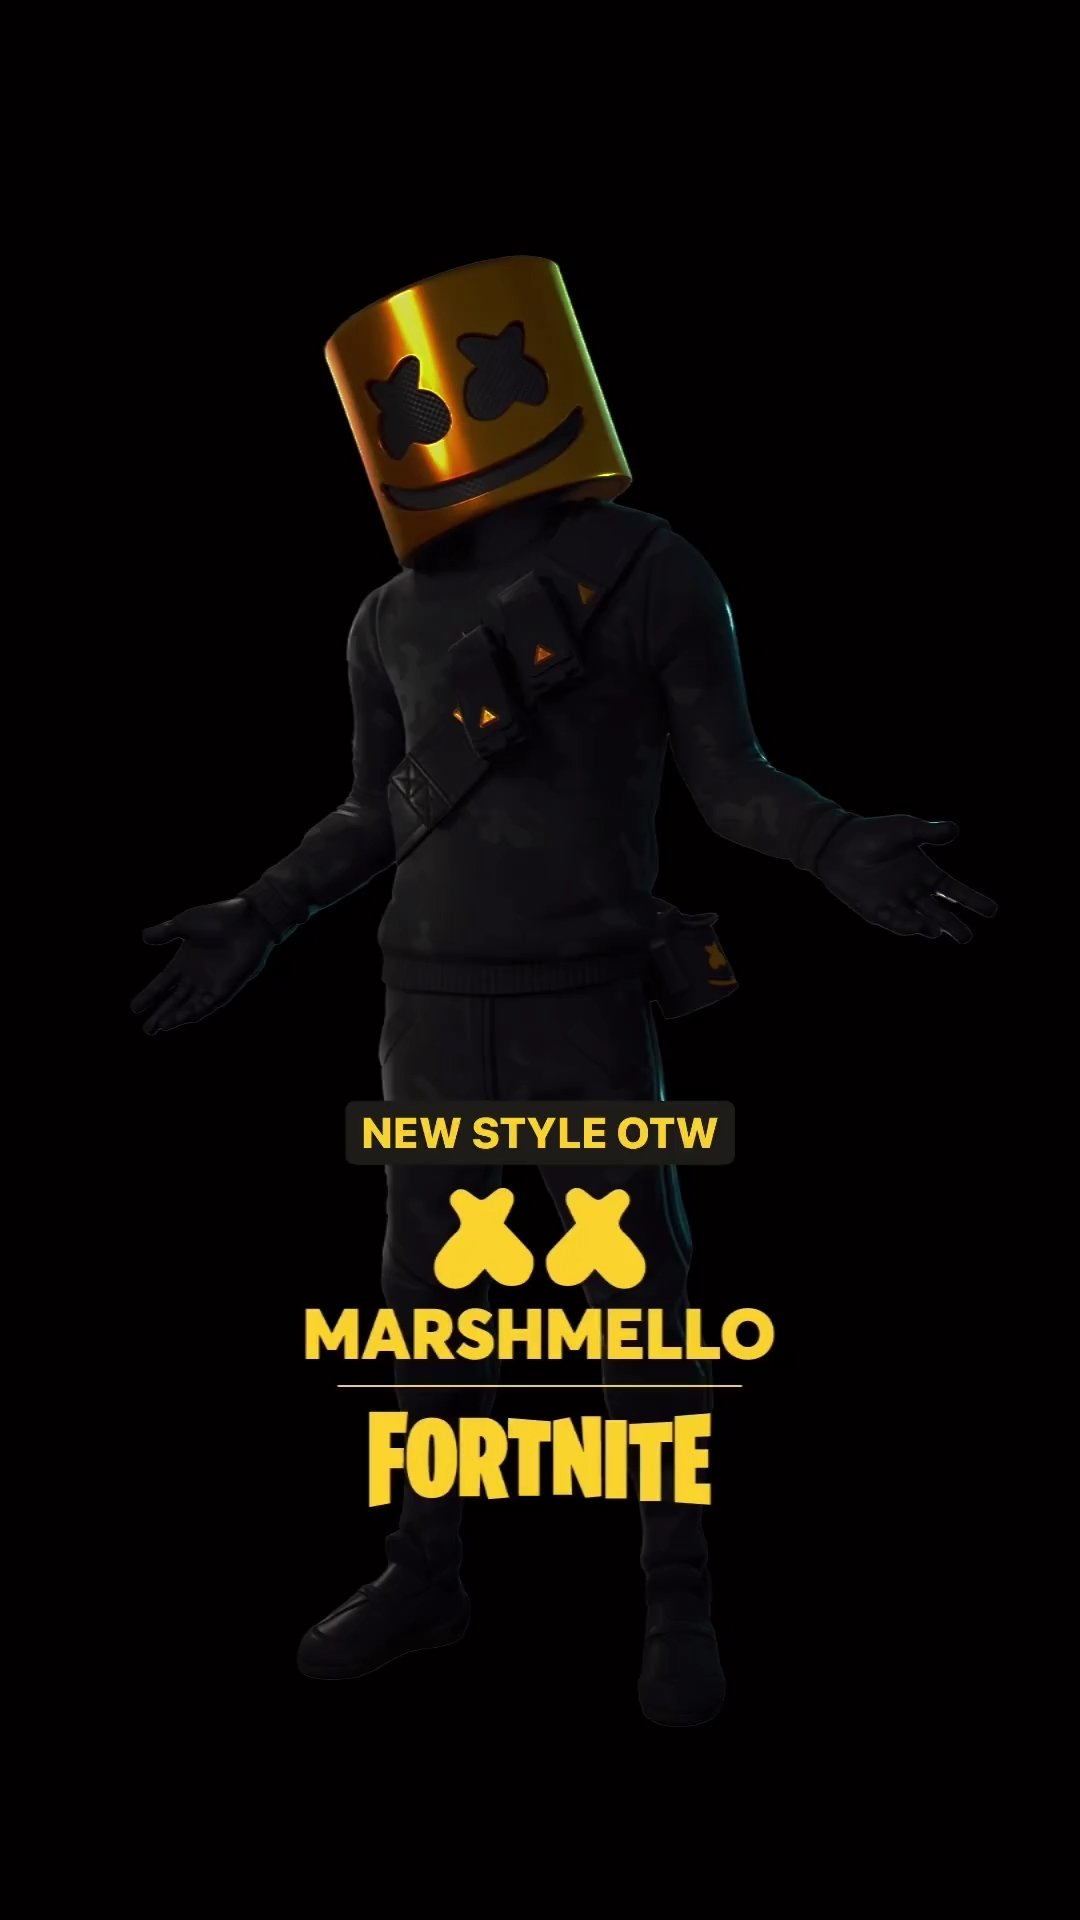 Black style for the Marshmello outfit is coming to Fortnite 